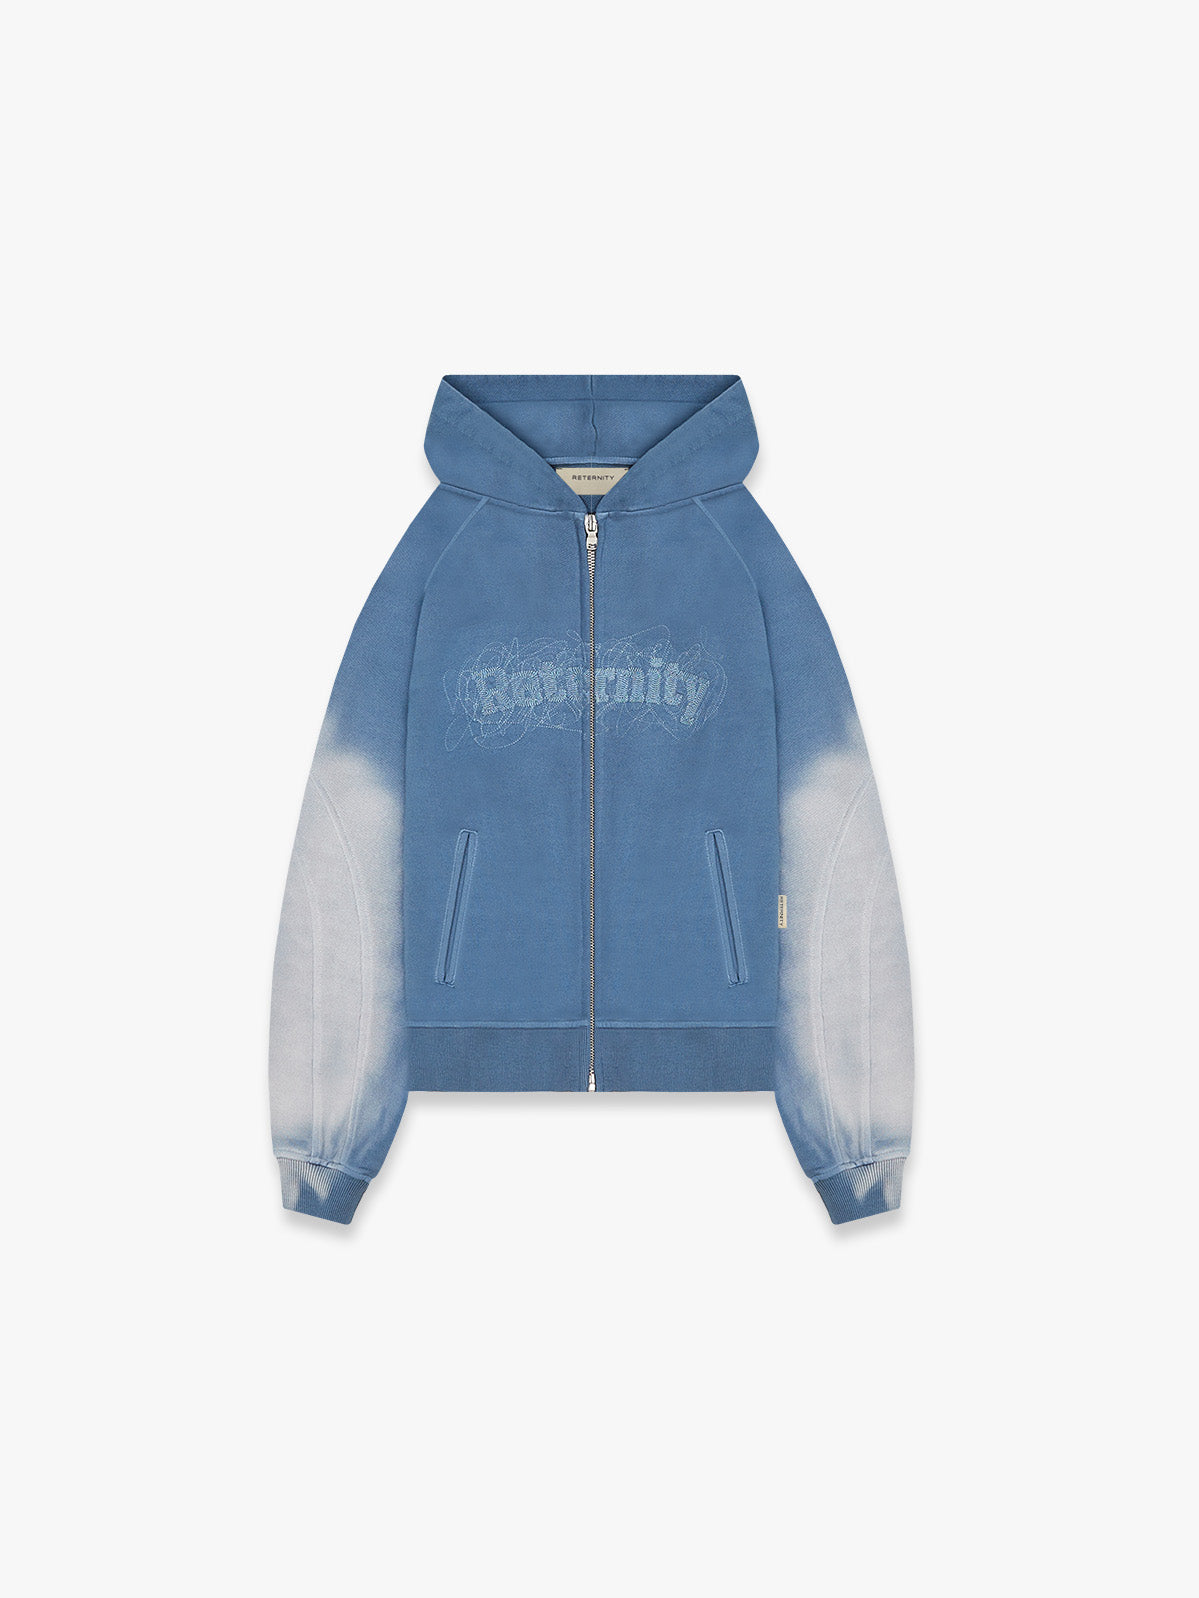 EMBROIDERED ZIP-HOODIE - FADED BLUE-GREY